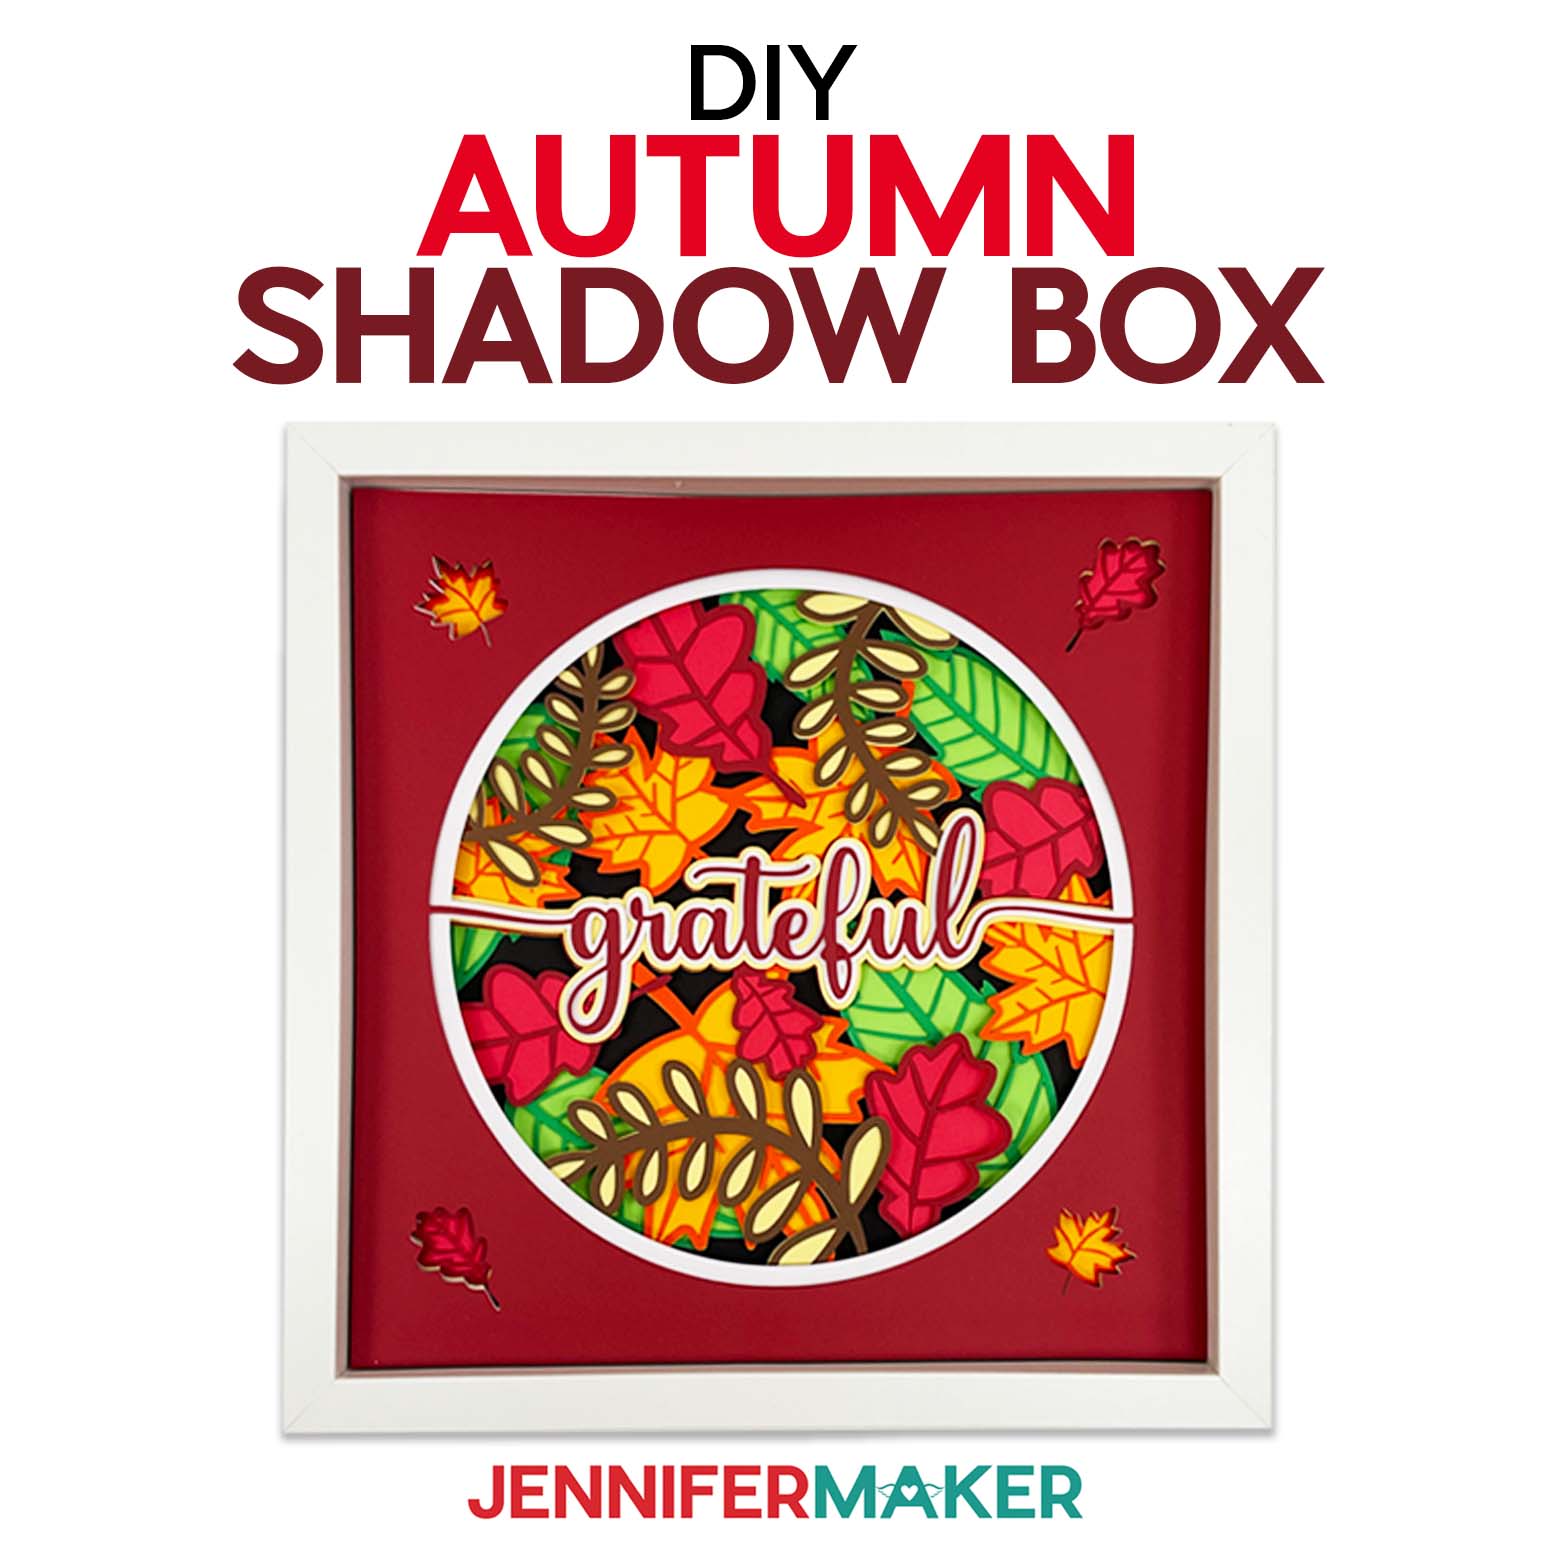 Make a DIY Autumn Shadowbox with JenniferMaker's tutorial! A fall-colored Autumn shadow box that says "grateful" in script.